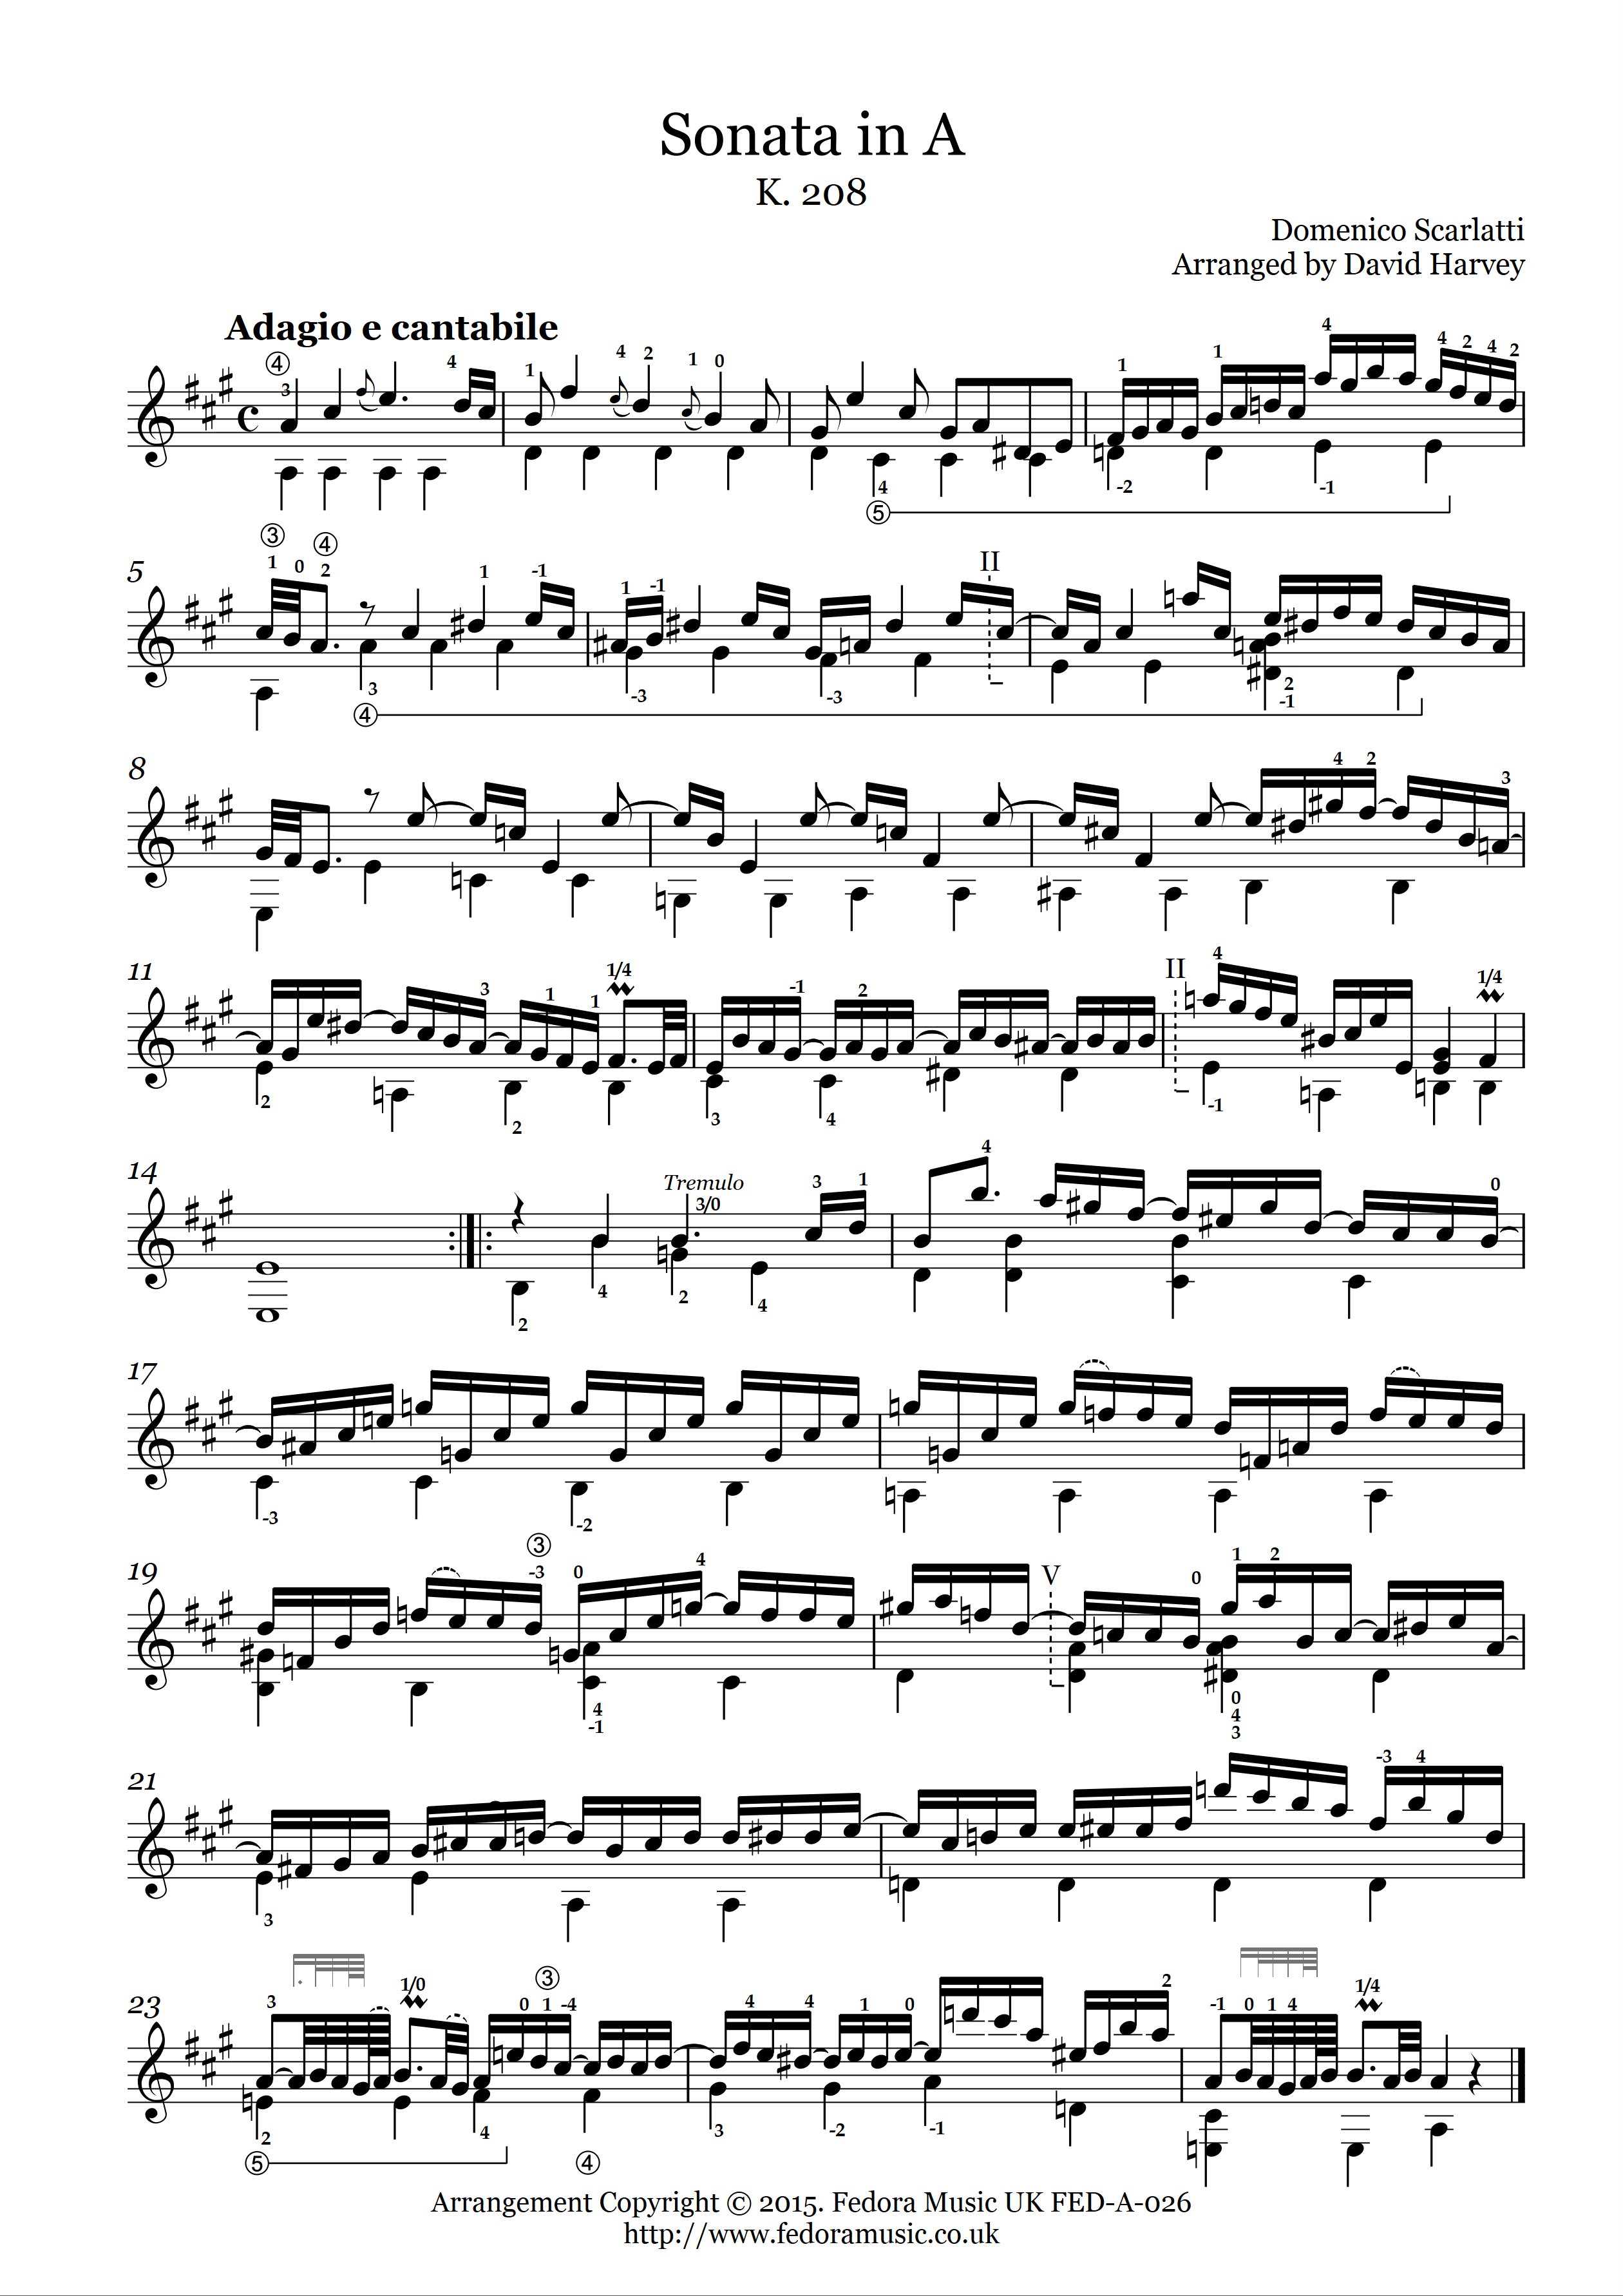 Sonata in A, K.208  (FREE DOWNLOAD!) - sample page